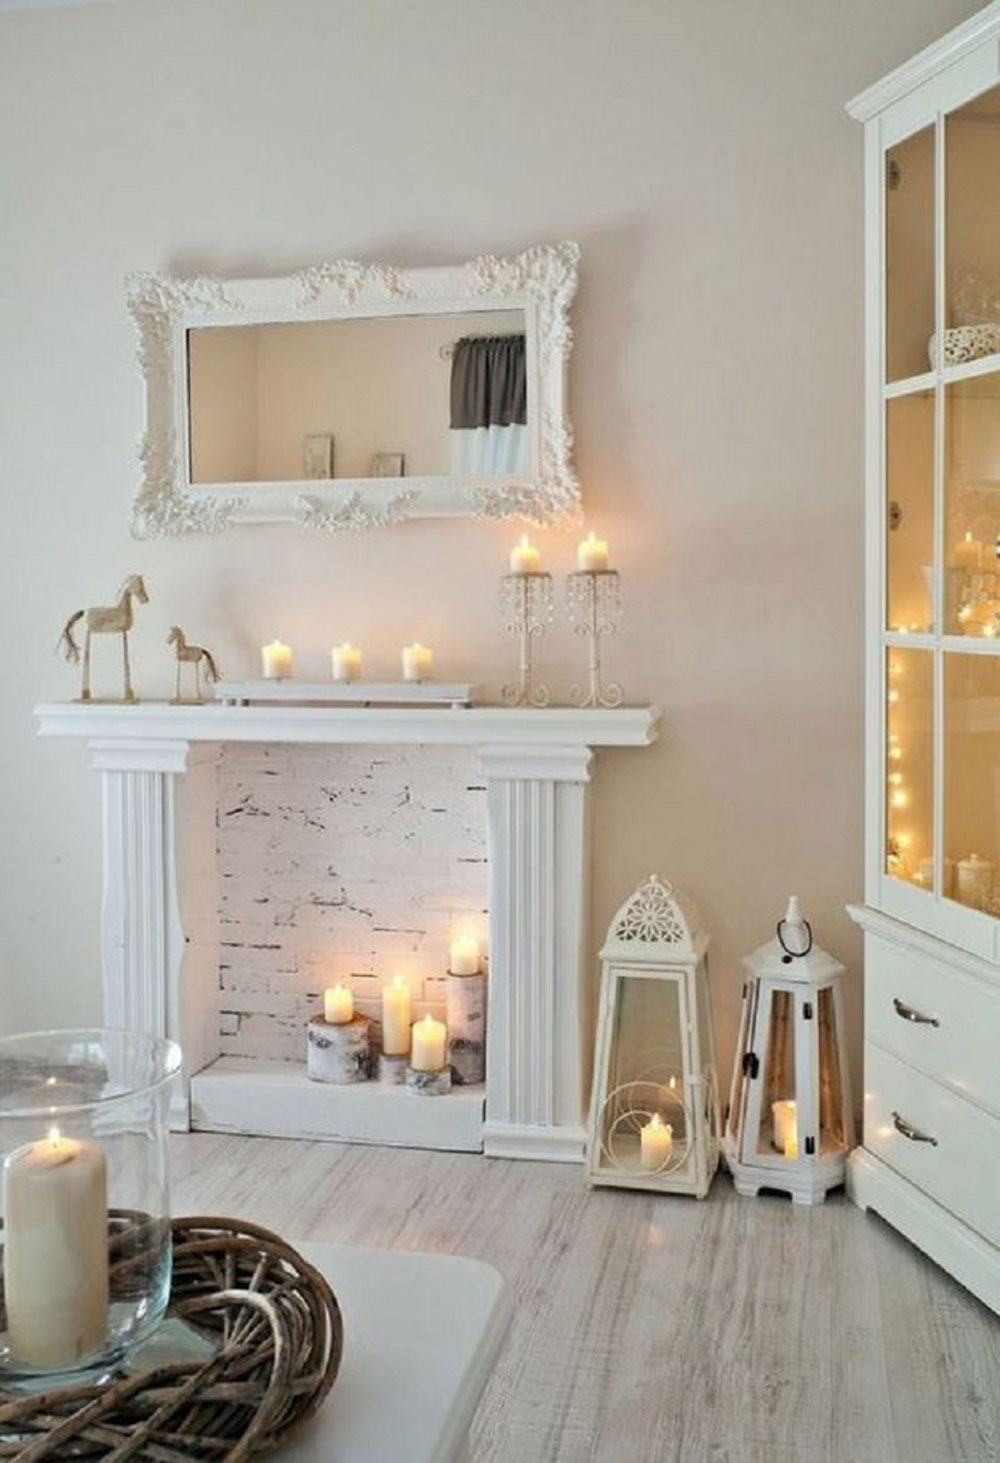 Candles How to decorate an unused fireplace to look good?